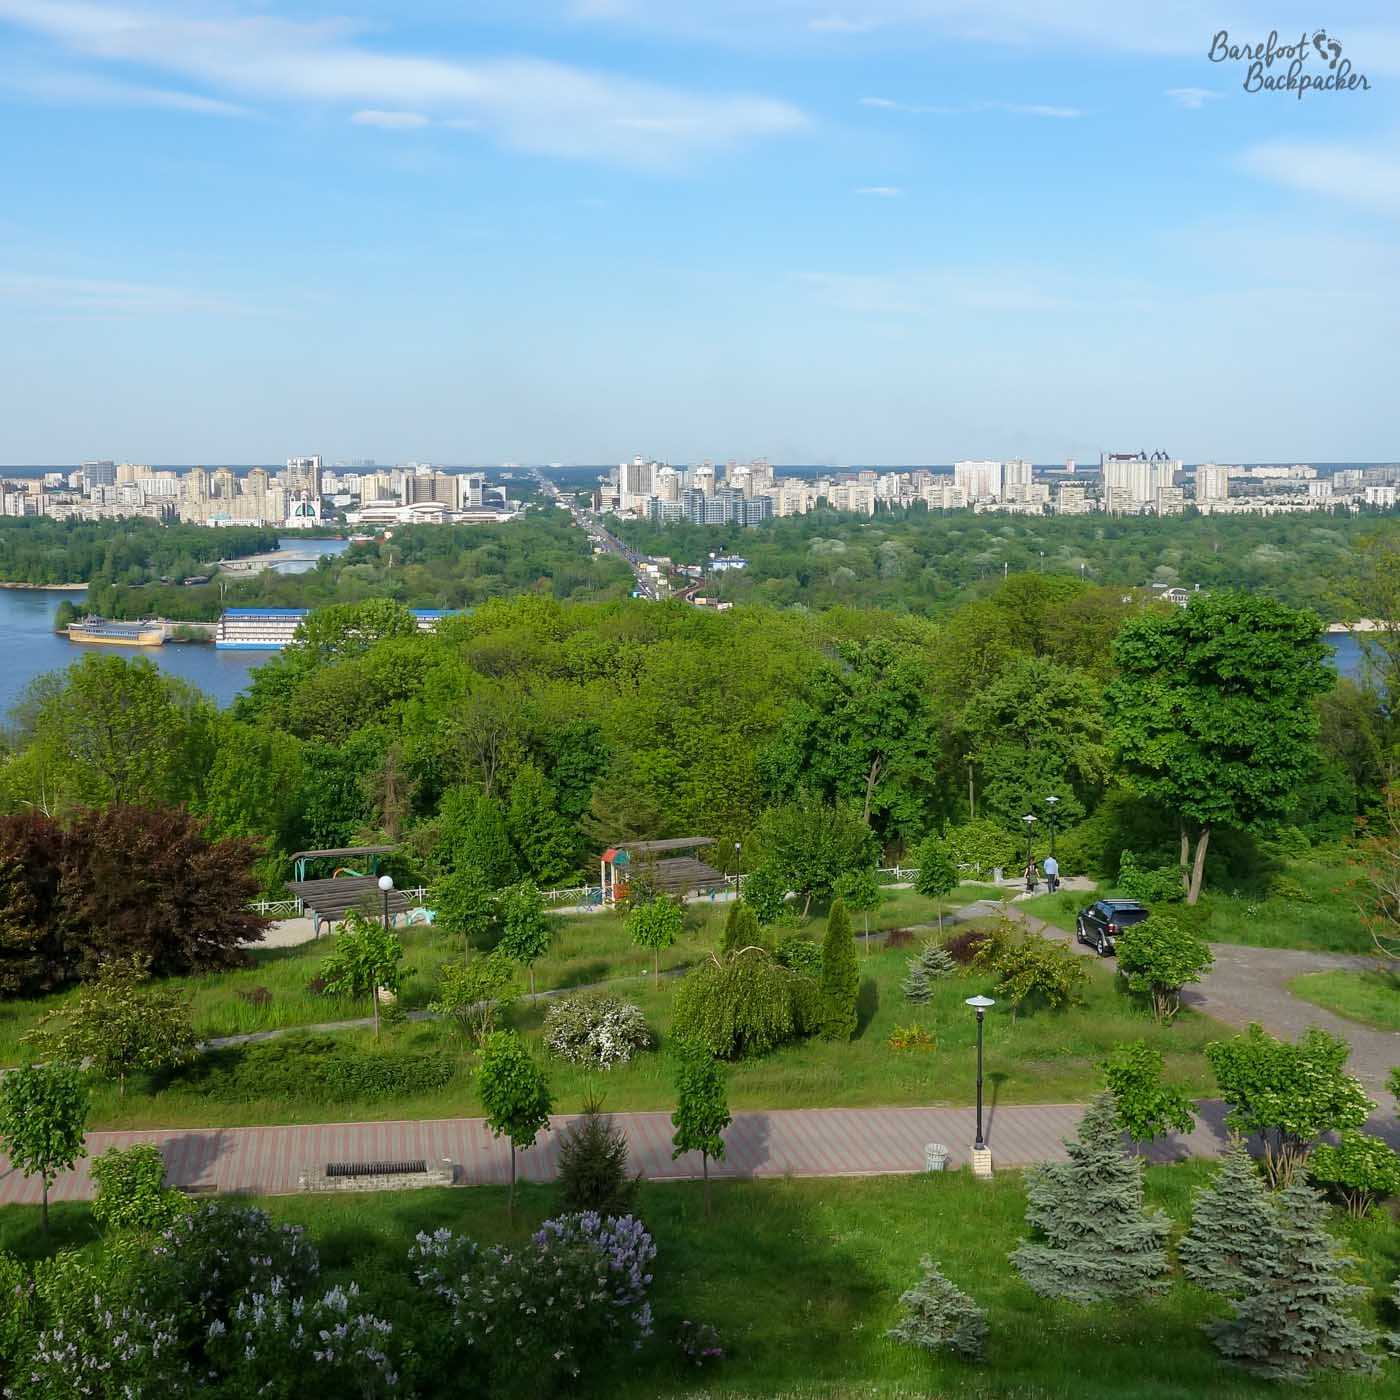 From the top of a small hill, there is a view looking out over the landscape beyond. It's mostly trees down below, then a wide river, and in the distance, tower blocks of a different city.